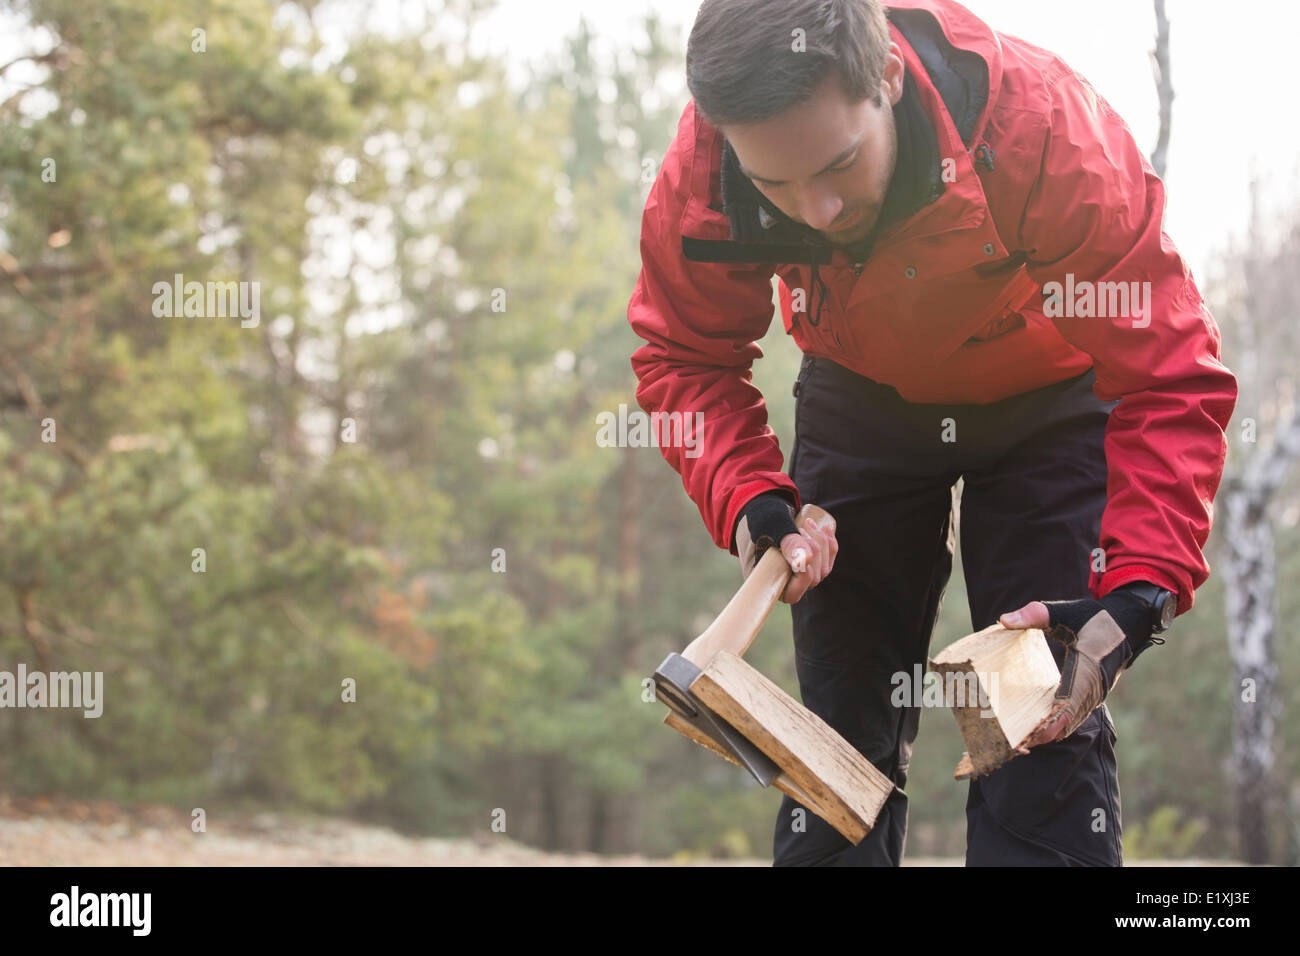 Male hiker cutting firewood in forest Stock Photo